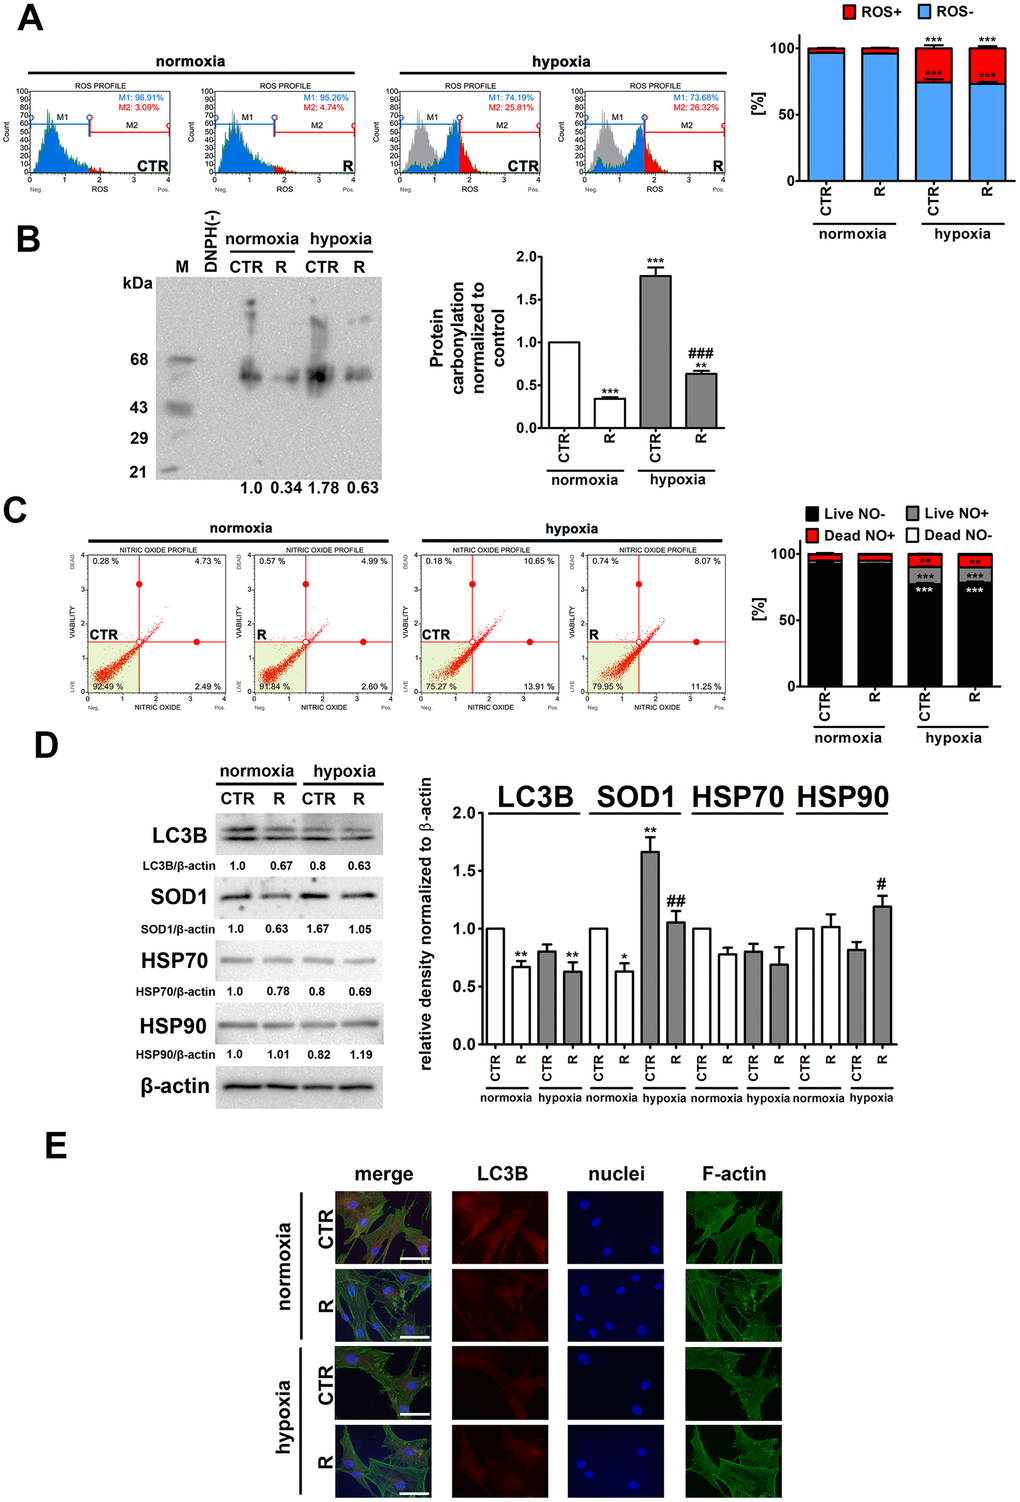 Hypoxia-induced oxidative stress (A, B), nitrosative stress (C), adaptive oxidative stress, heat shock/chaperone and autophagy-based responses (D, E), and the effect of remifentanil preconditioning in HCM cells. (A) Superoxide levels were measured using Muse® Cell Analyzer and Muse® Oxidative Stress Kit. Representative histograms are presented. (B) Protein carbonylation was investigated using OxyBlot™ Protein Oxidation Detection Kit. A negative control without DNPH derivatization (lane DNPH(-)) and a positive control with a mixture of standard proteins with attached DNP residues (lane M) are also shown. The levels of oxidative protein damage were normalized and protein carbonylation during normoxic control conditions was considered as 1. (C) Nitric oxide levels were investigated using Muse® Cell Analyzer and Muse® Nitric Oxide Kit. Representative dot-plots are also shown. (D) Western blot analysis of the levels of LC3B, SOD1, HSP70 and HSP90. Data were normalized to β-actin. (E) Immunofluorescence analysis of cellular localization of LC3B (red). Representative microphotographs are shown, objective 10×, scale bars 15 μm. F-actin staining (green) and nucleus staining (blue) were also considered. Bars indicate SD, n = 3, ***p **p *p ###p ##p #p a posteriori test). CTR, control; R, remifentanil preconditioning.